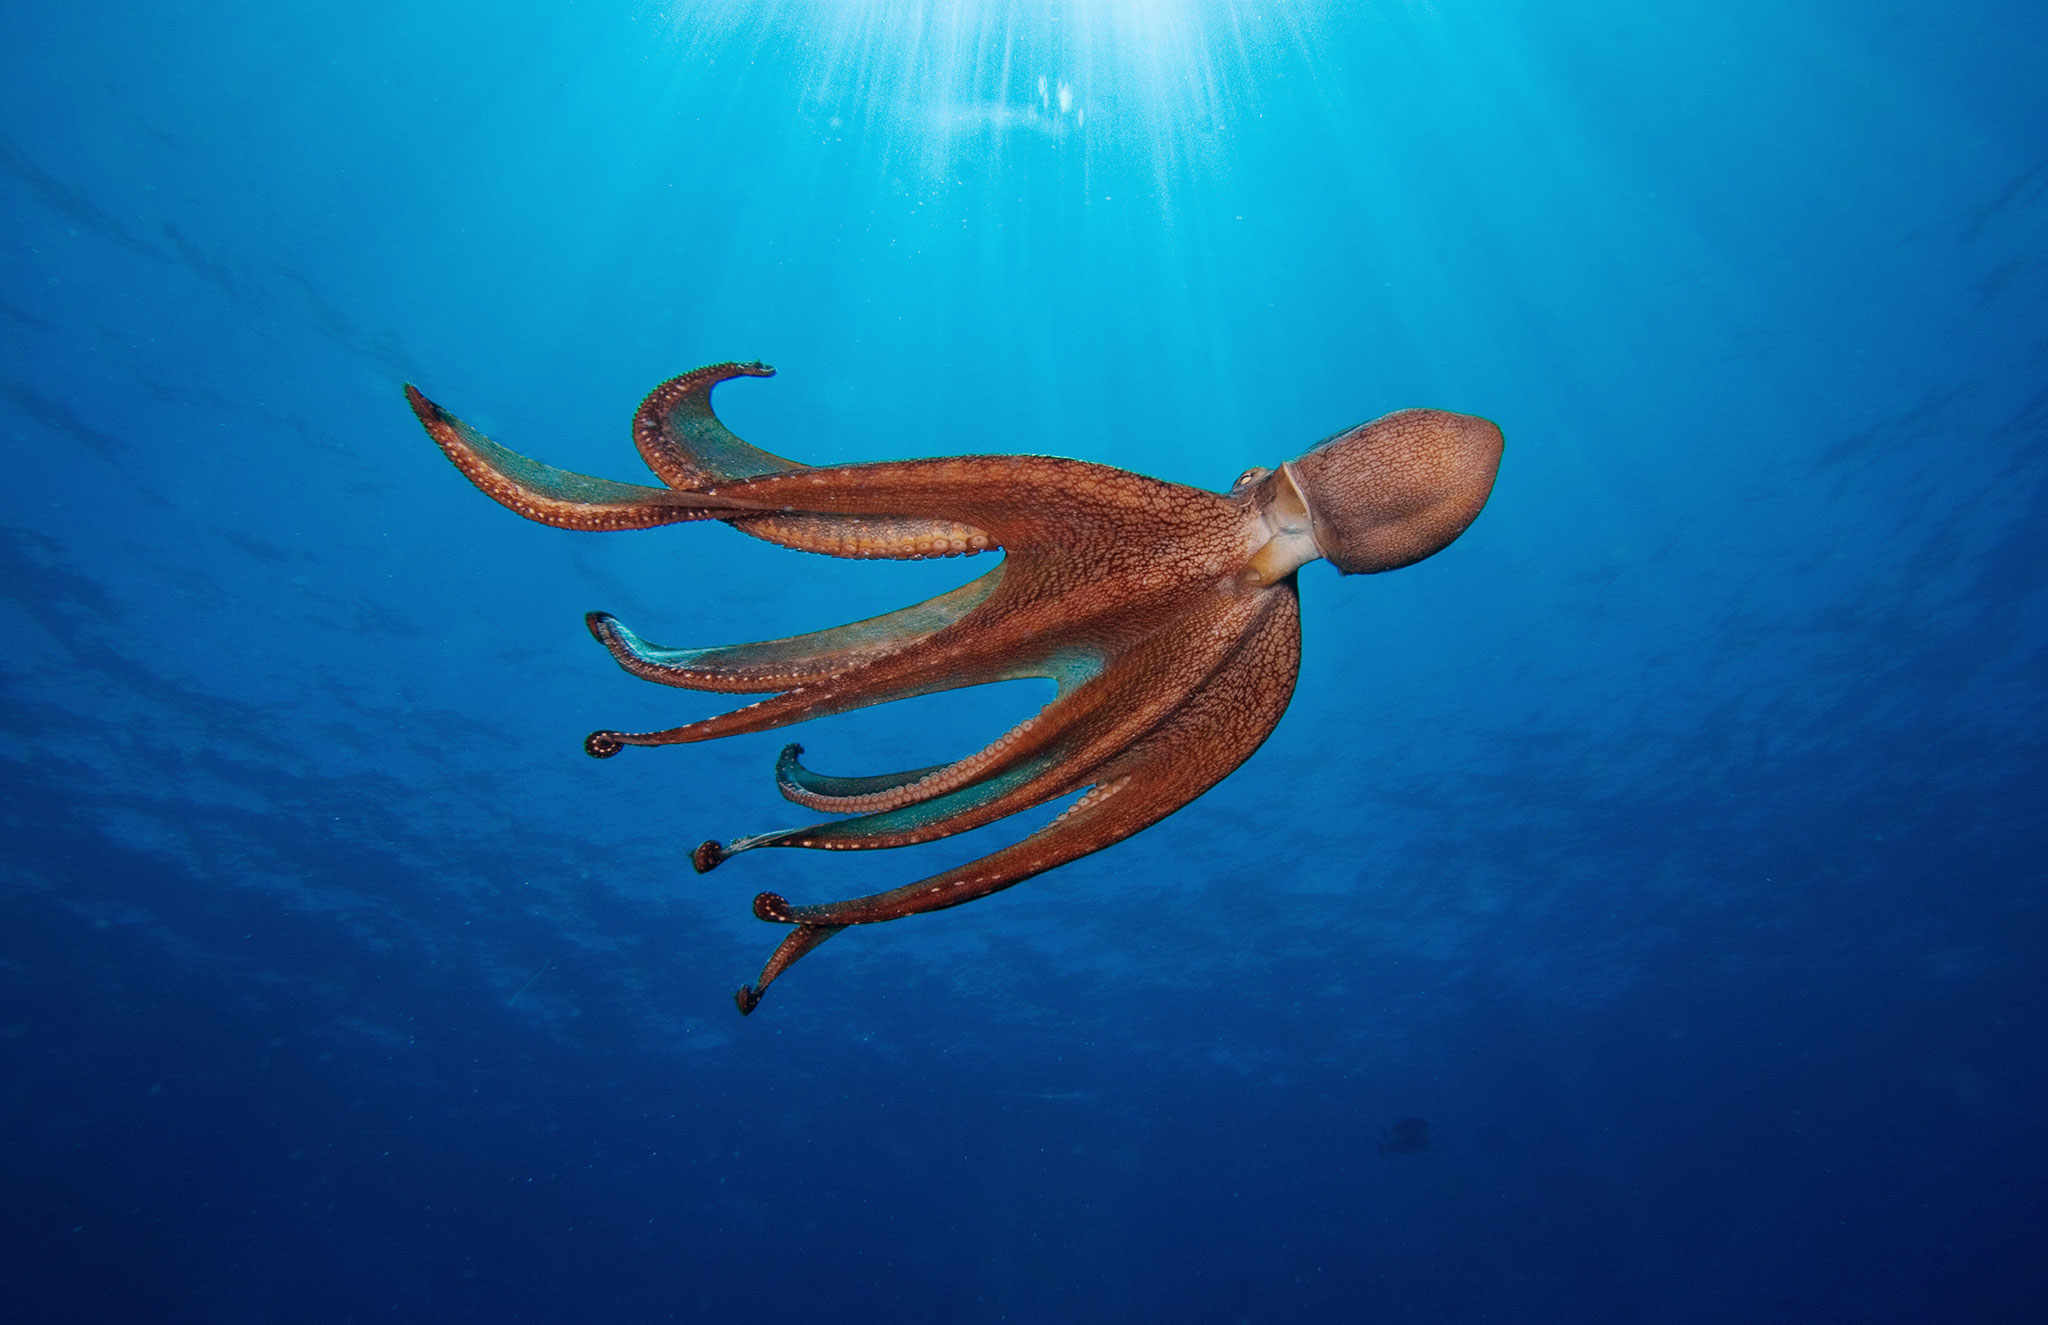 Does An Octopus Have A Soul? This Author Thinks So